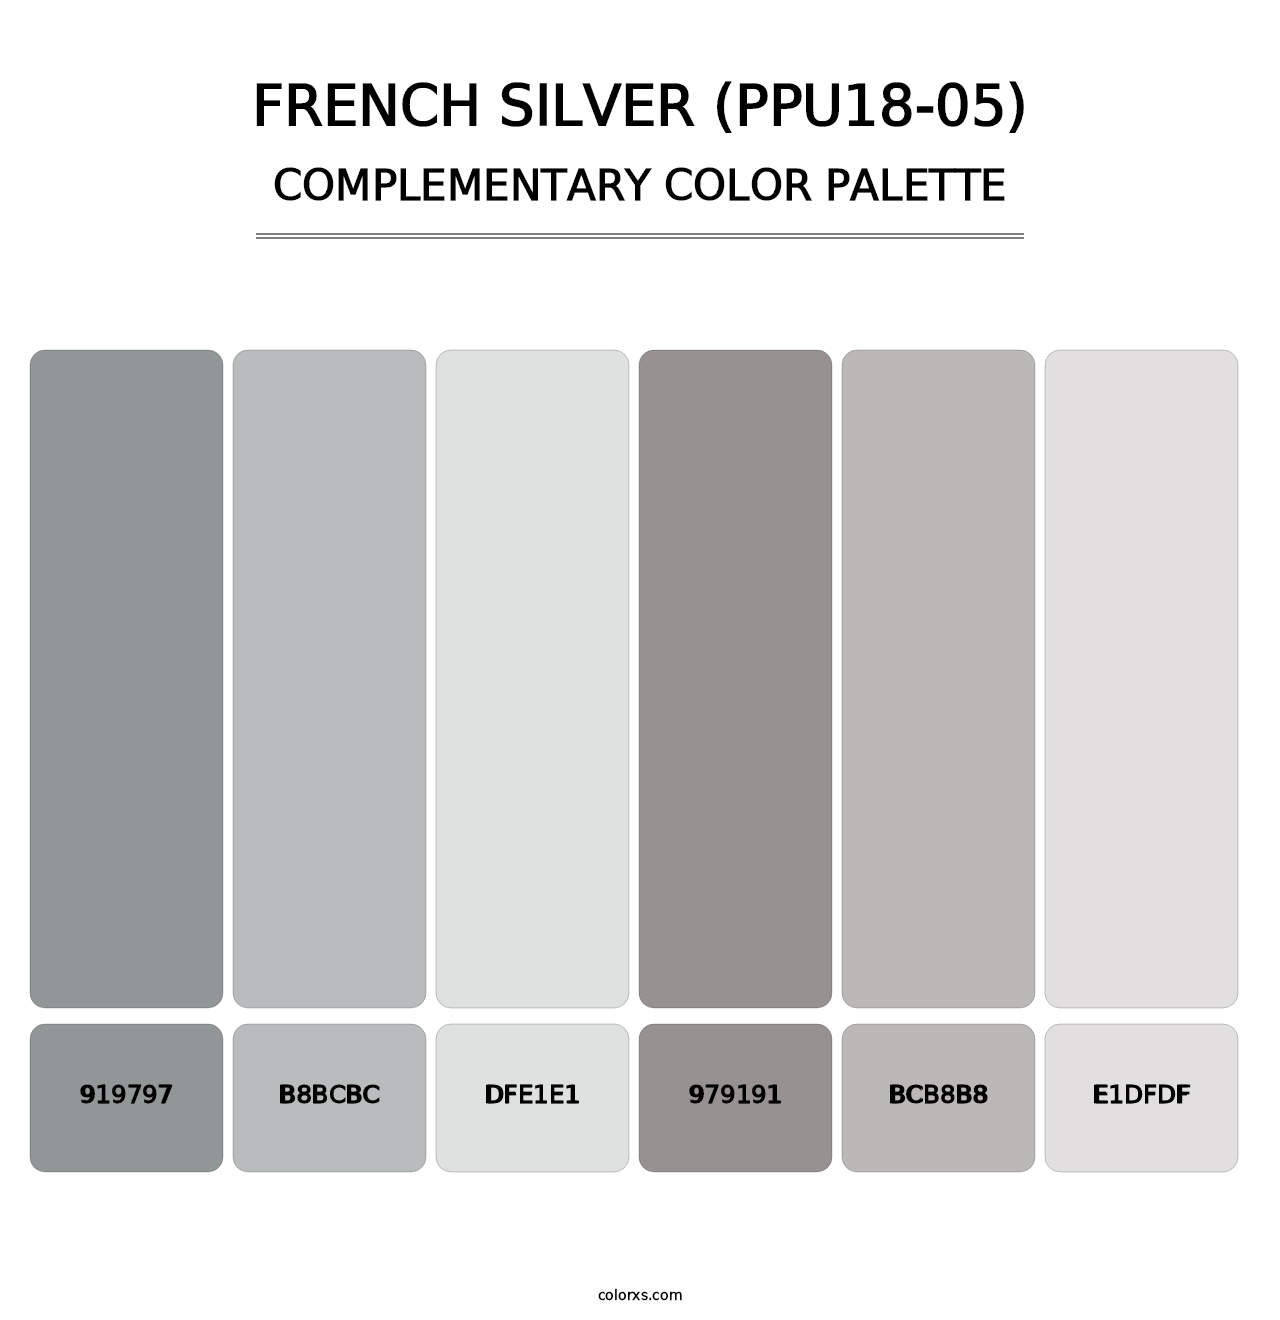 French Silver (PPU18-05) - Complementary Color Palette